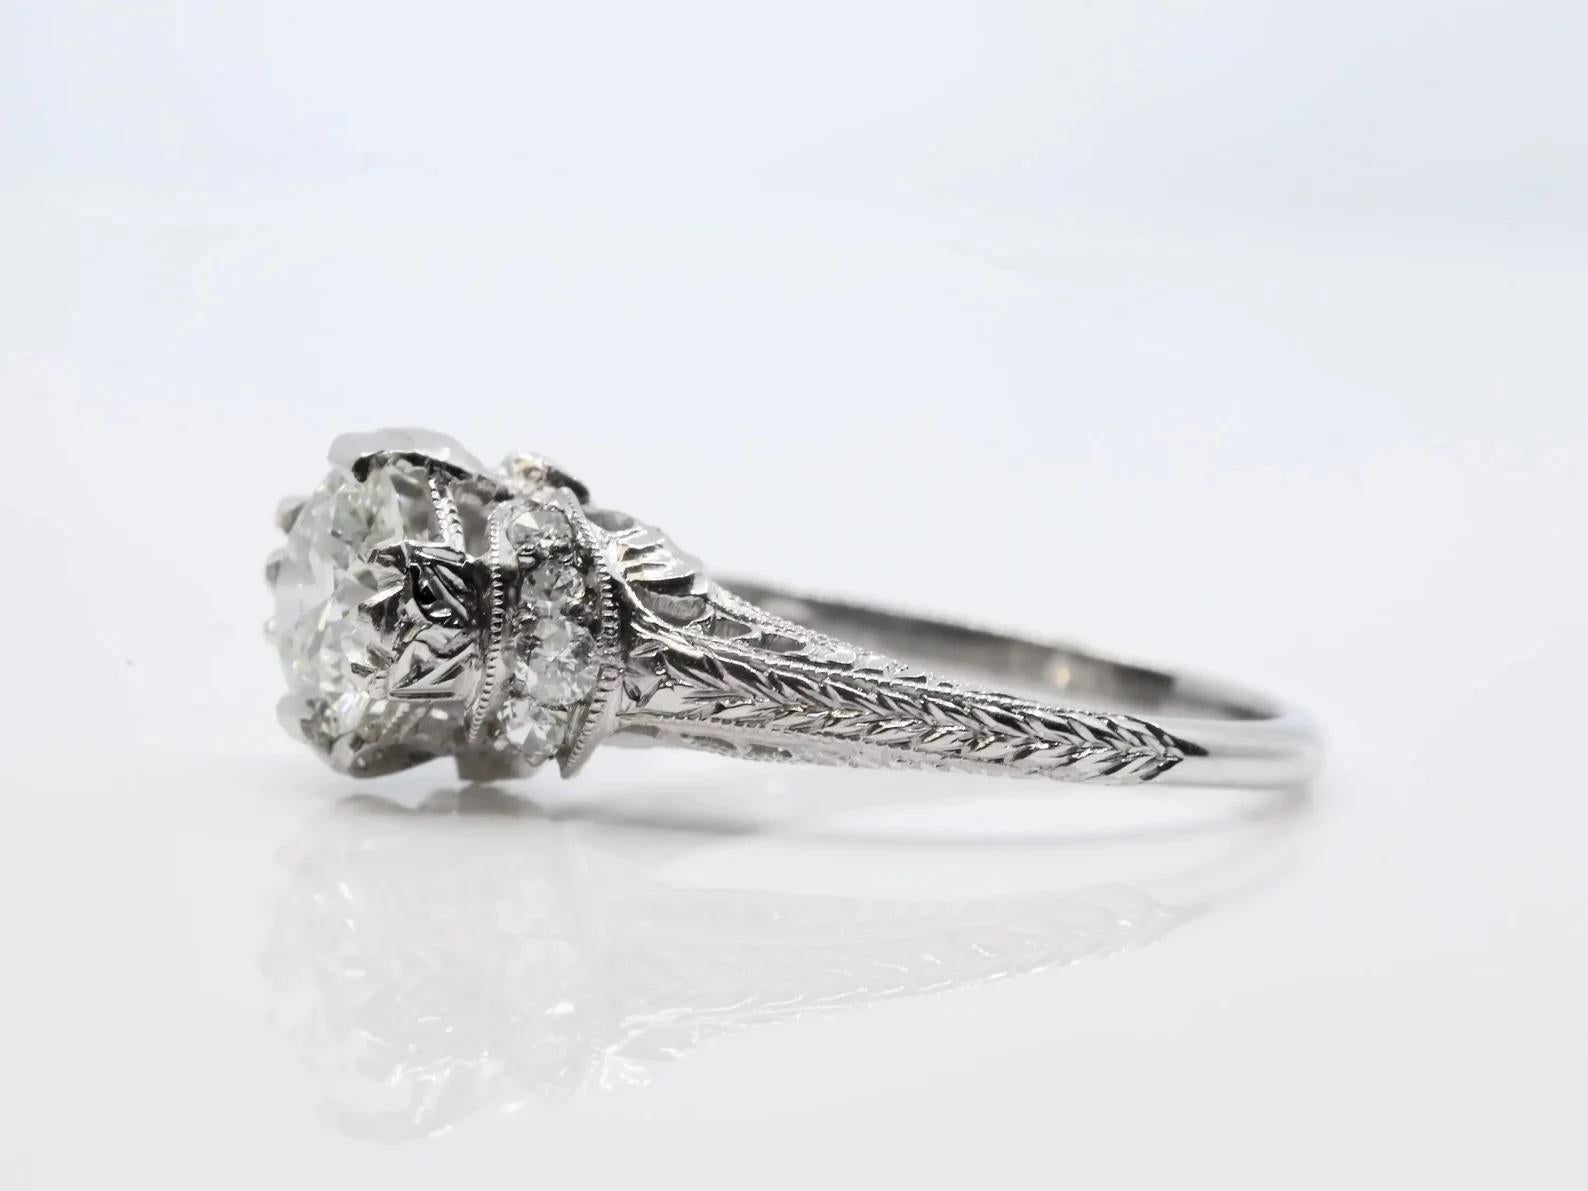 A handmade original Art Deco period diamond solitaire engagement ring in platinum. Centering this one of a kind ring is a 0.75 carat European cut diamond grading as H color and SI clarity. Wrapping around the center diamond are a pair of hand